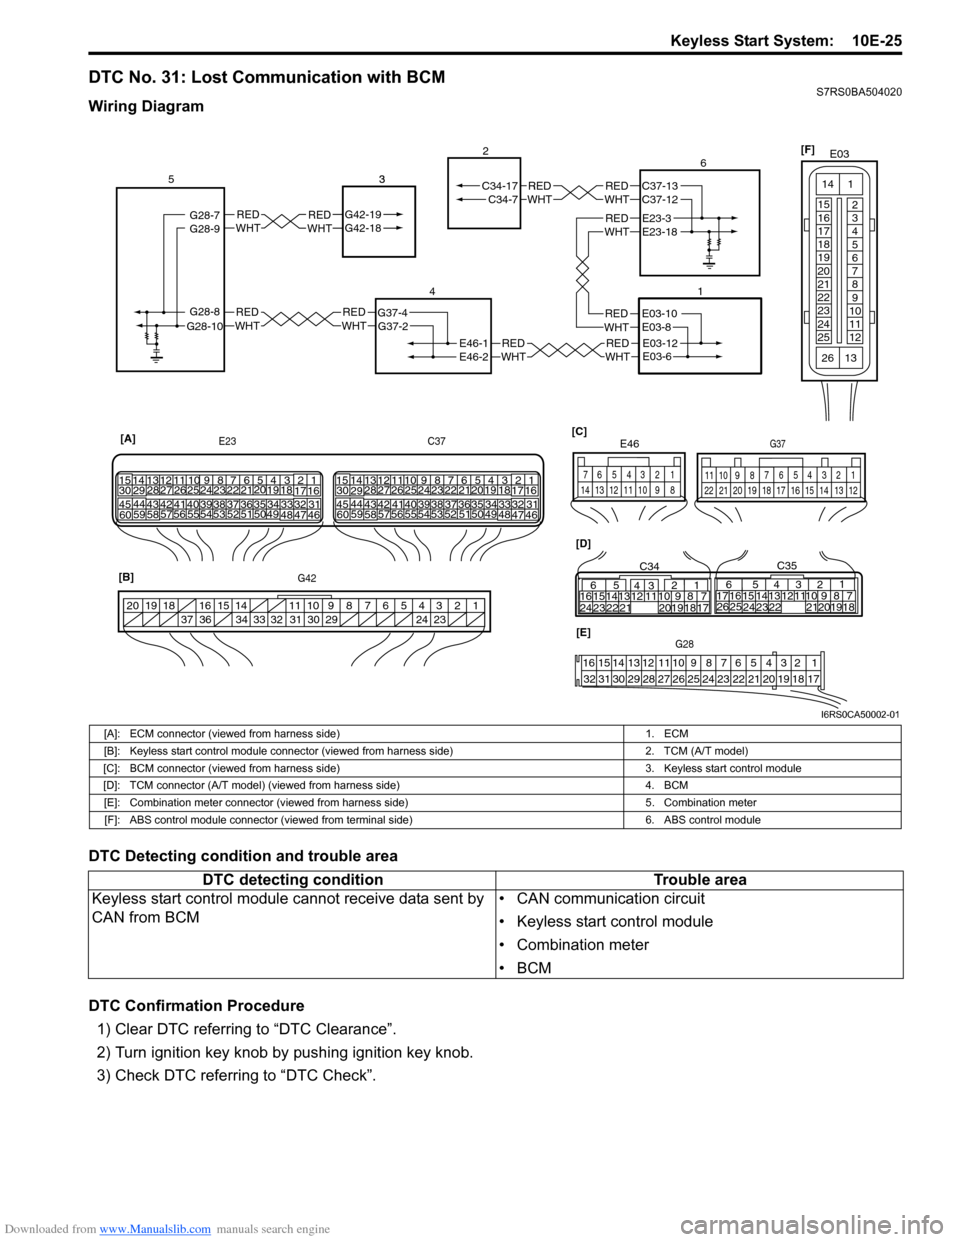 SUZUKI SWIFT 2008 2.G Service Workshop Manual Downloaded from www.Manualslib.com manuals search engine Keyless Start System:  10E-25
DTC No. 31: Lost Communication with BCMS7RS0BA504020
Wiring Diagram
DTC Detecting condition and trouble area
DTC 